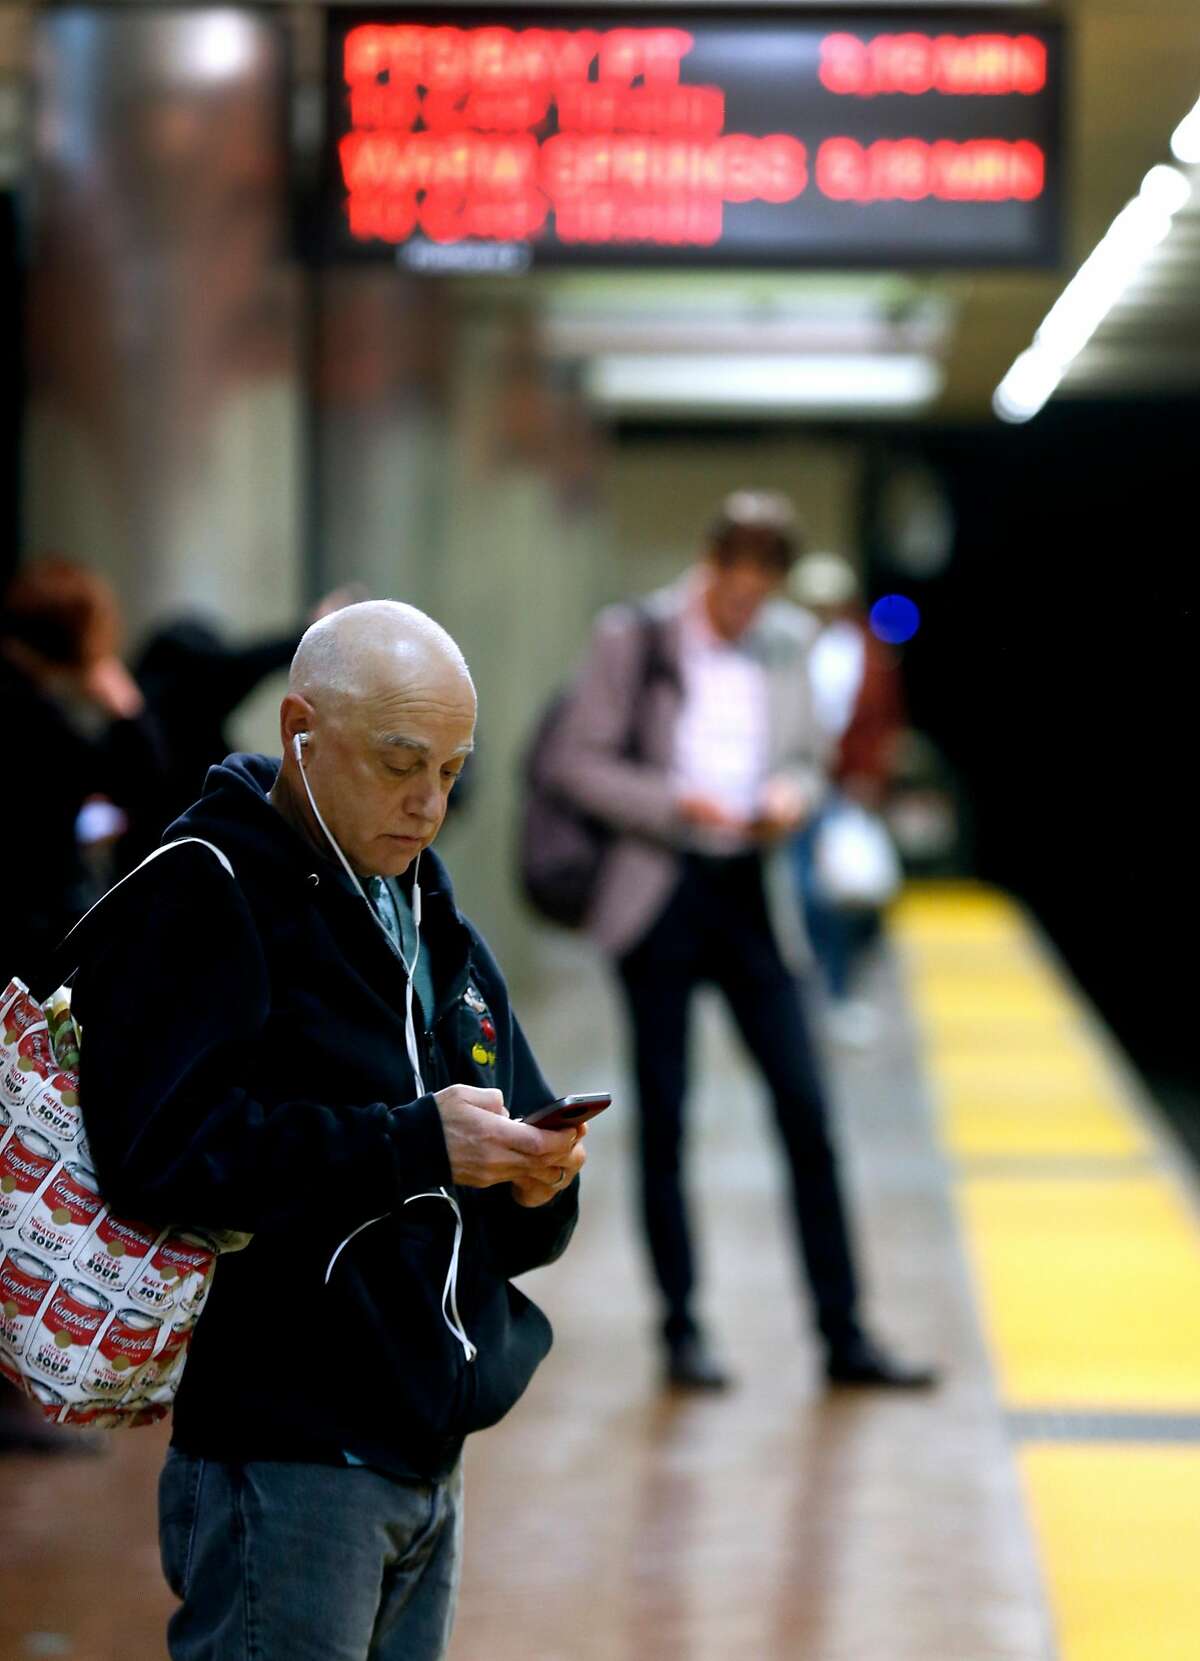 Commuters use their mobile phones while waiting to board eastbound trains at the Powell Street BART station in San Francisco, Calif. on Wednesday, March 7, 2018. BART is about to award a contract to provide wi-fi connectivity in all of its stations and trains.